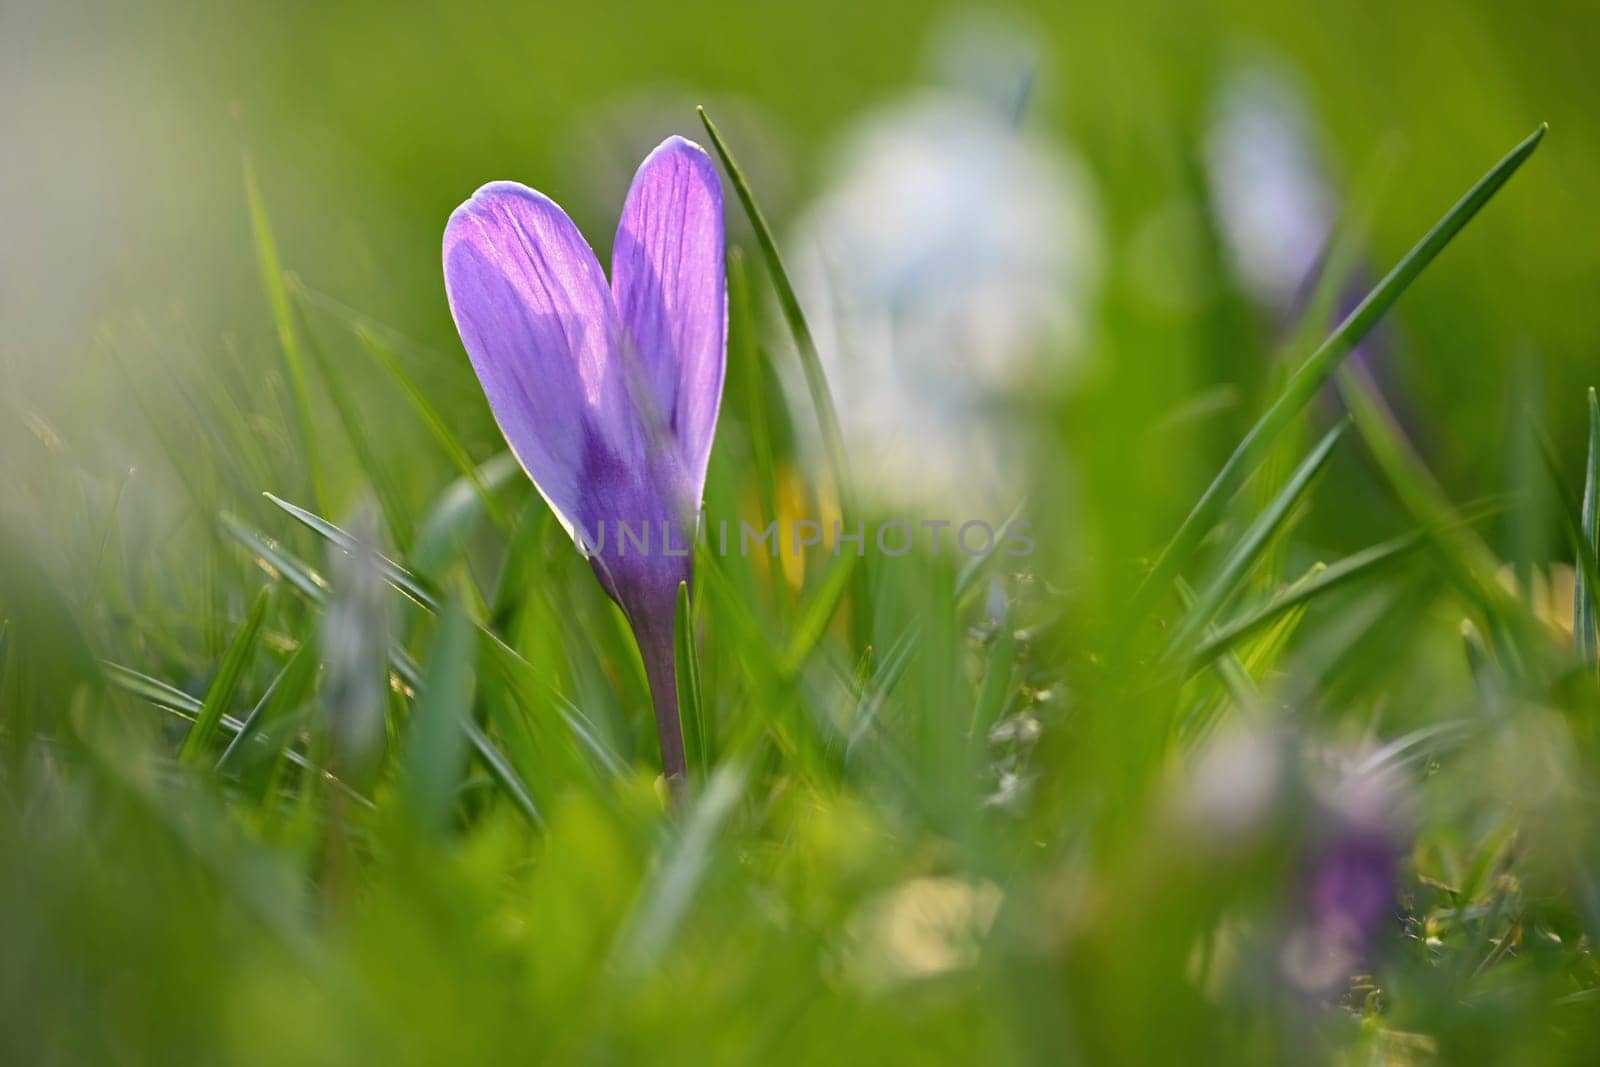 Spring background with flowers. Nature and delicate photo with details of blooming colorful crocuses in spring time.(Crocus vernus) by Montypeter